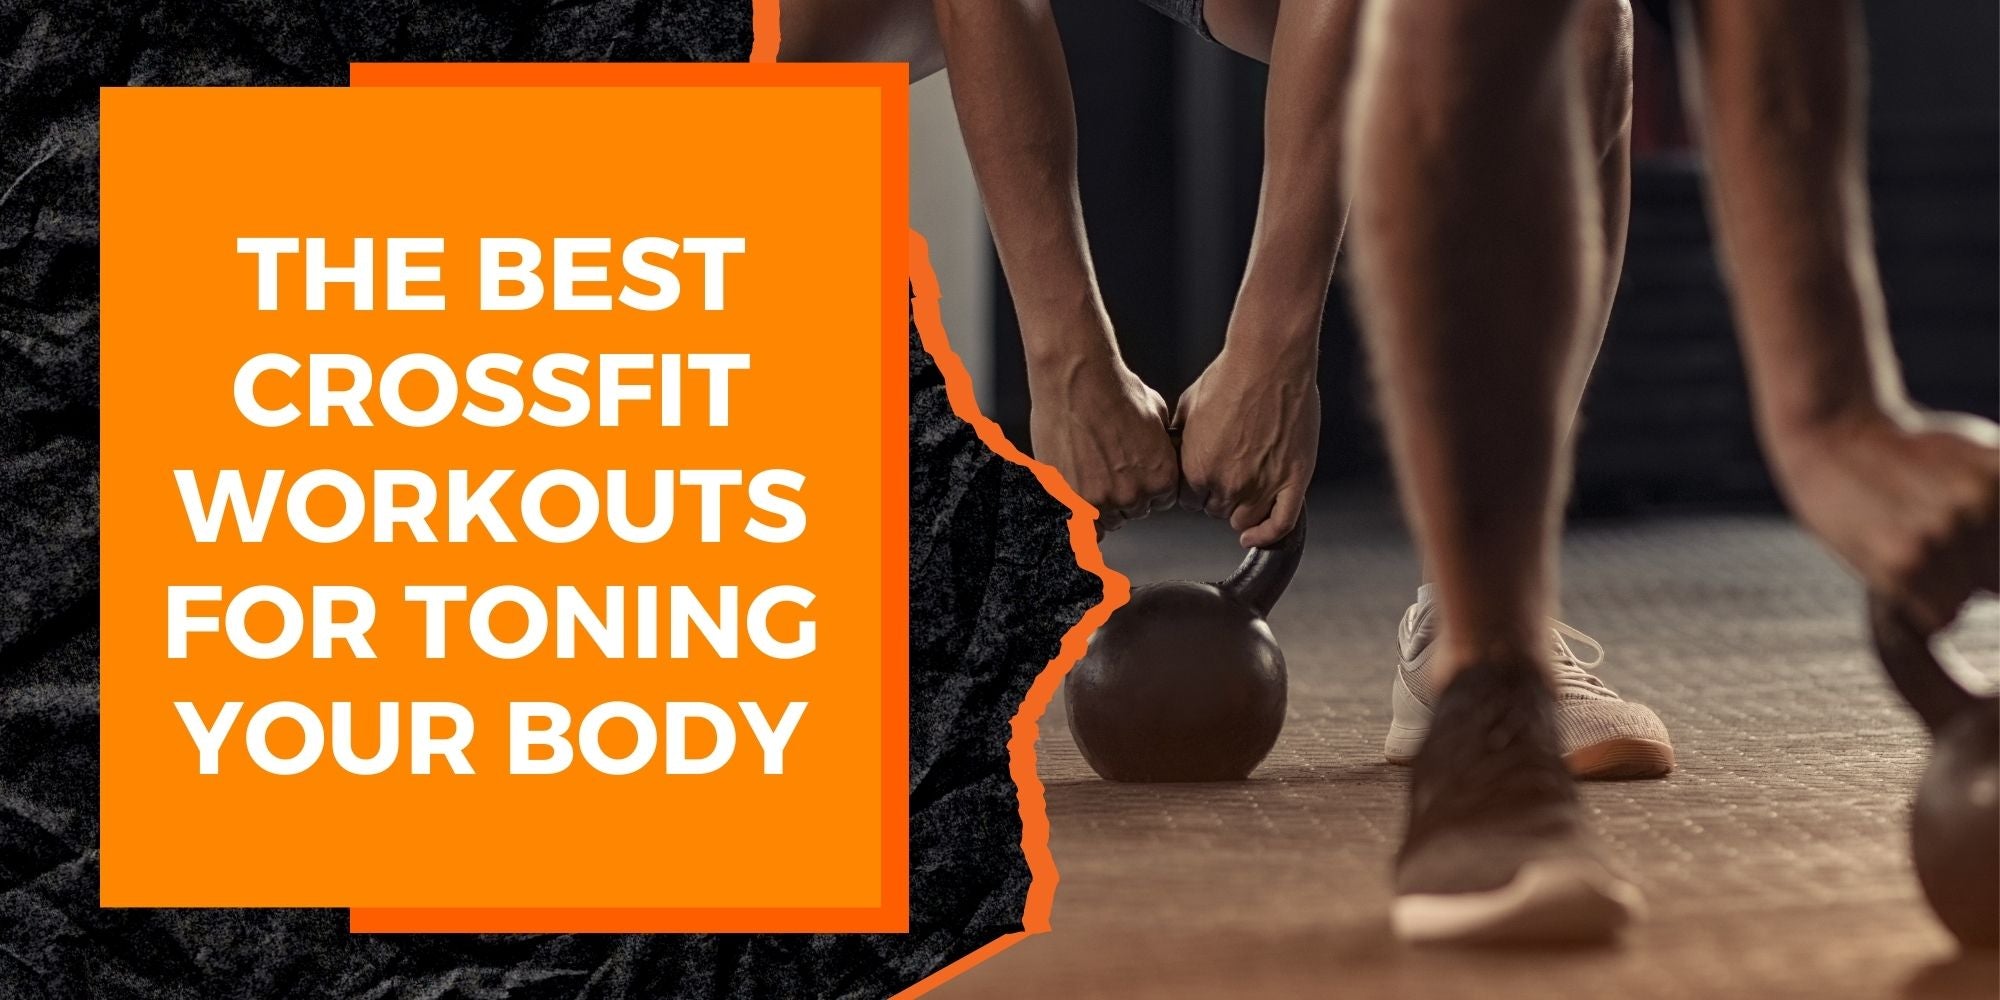 The Best CrossFit Workouts for Toning Your Body